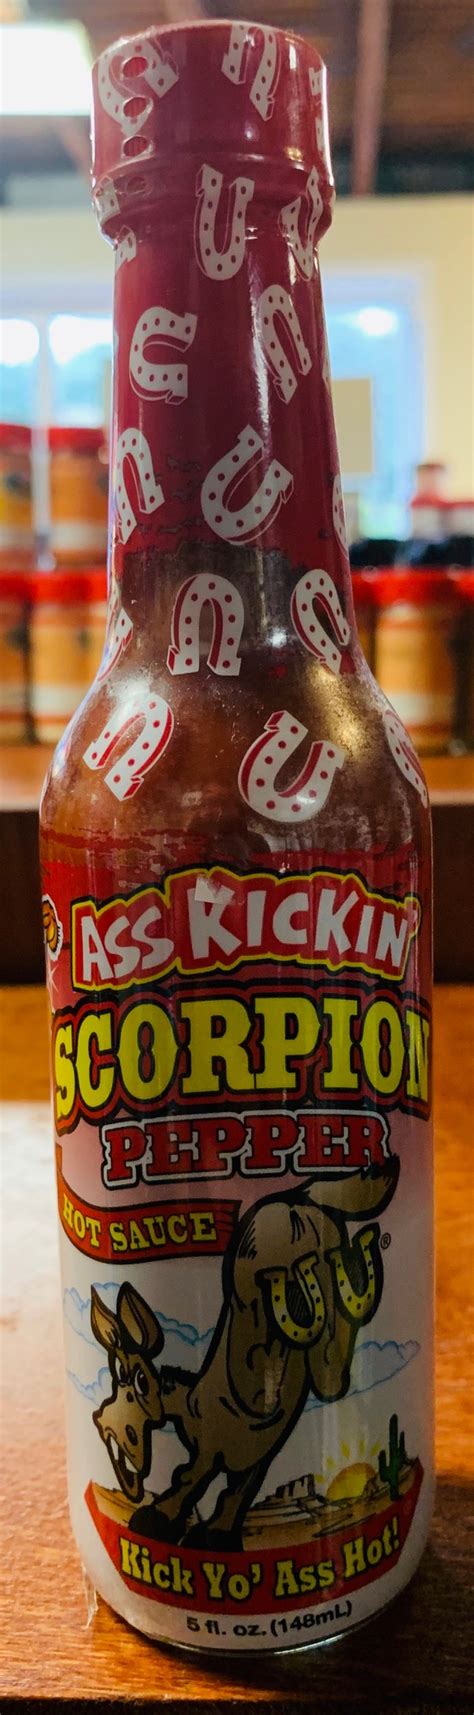 If you can get past the heat it has fruity tones in the background. Scorpion Pepper Hot Sauce - Clevelands' Country Store